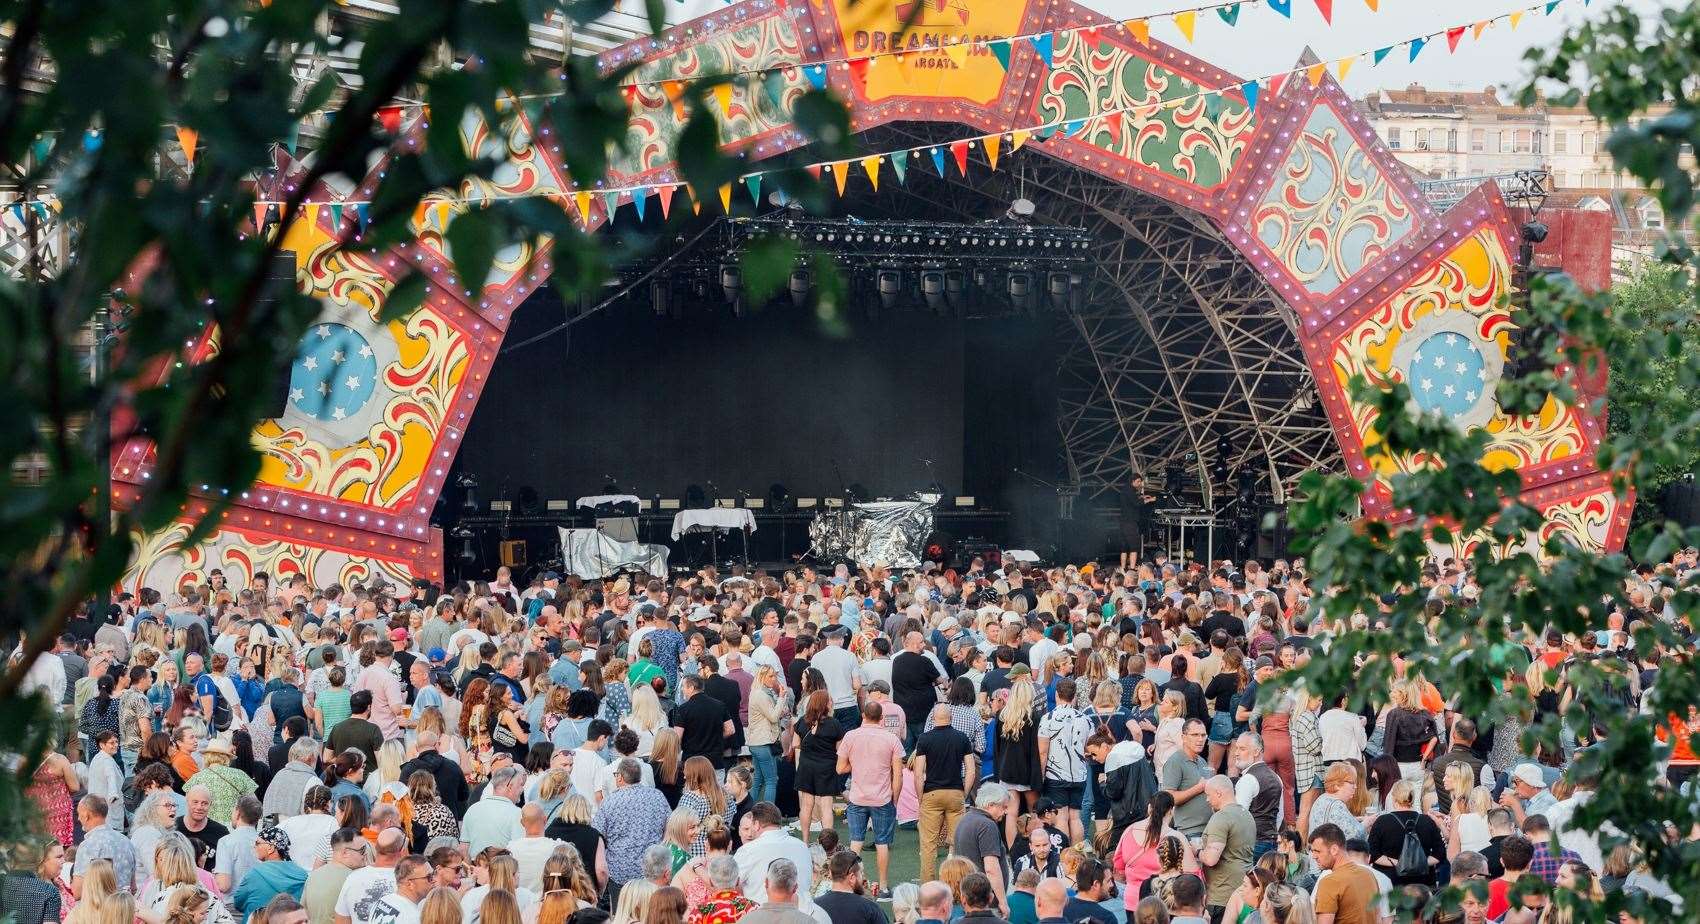 Dreamland will host a series of summer concerts from June to September, with artists including Bryan Adams, Madness, Becky Hill and Status Quo set to perform. Picture: Dreamland / Supplied by Two Tyger